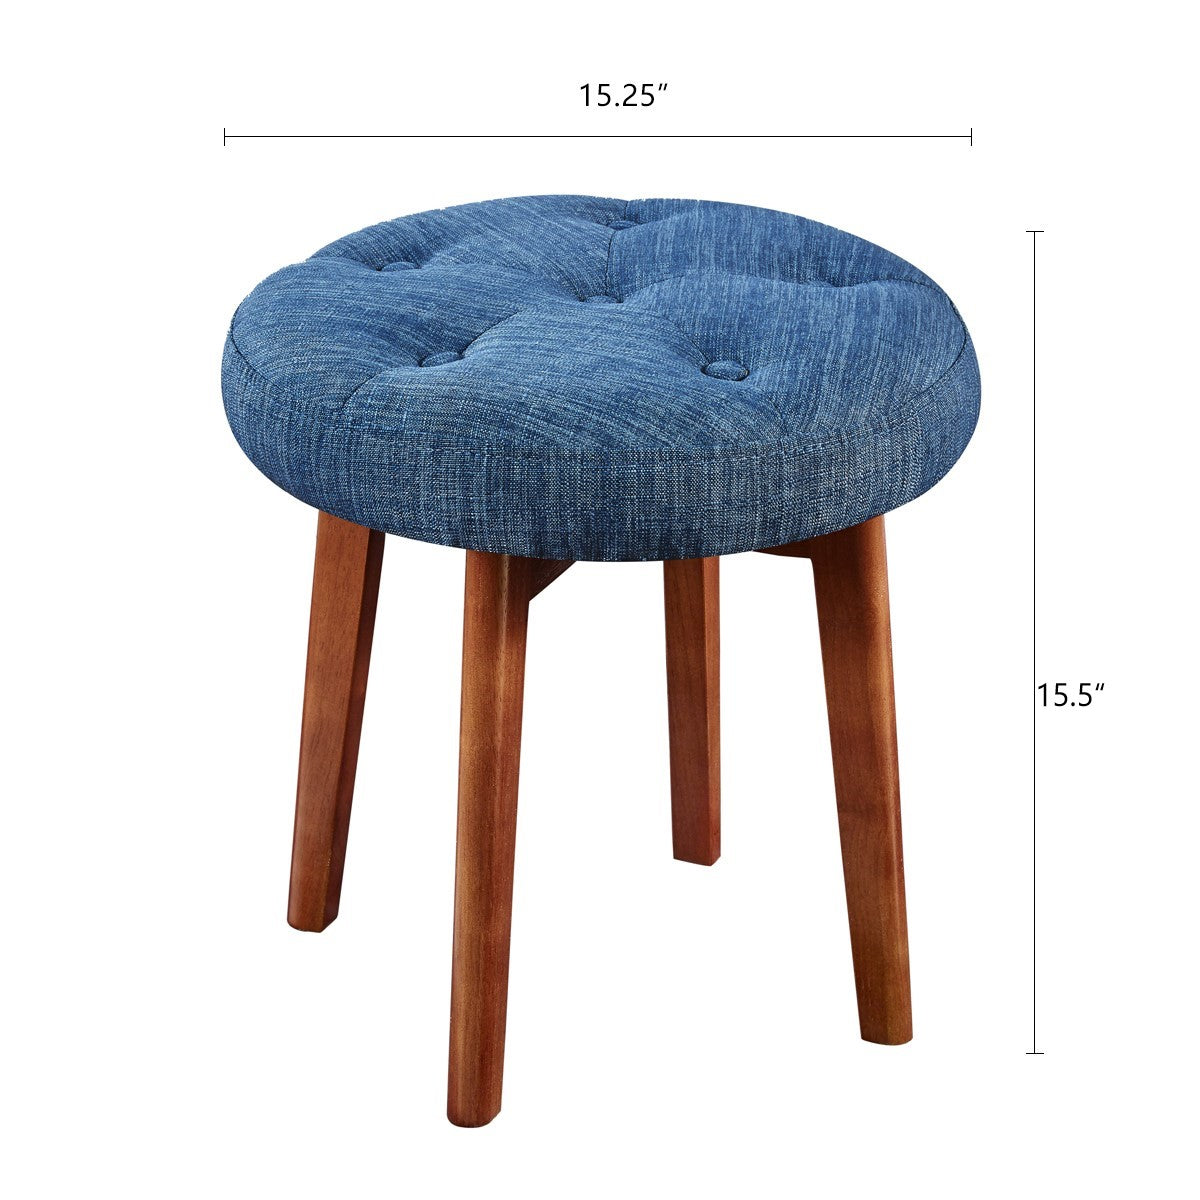 Small Foot Stools, Round Blue Padded Ottoman Foot Rest with Plastic Legs,  Footstools and Ottomans Small Comfy Footstool Upholstered for Living Room,  C for Sale in West Covina, CA - OfferUp